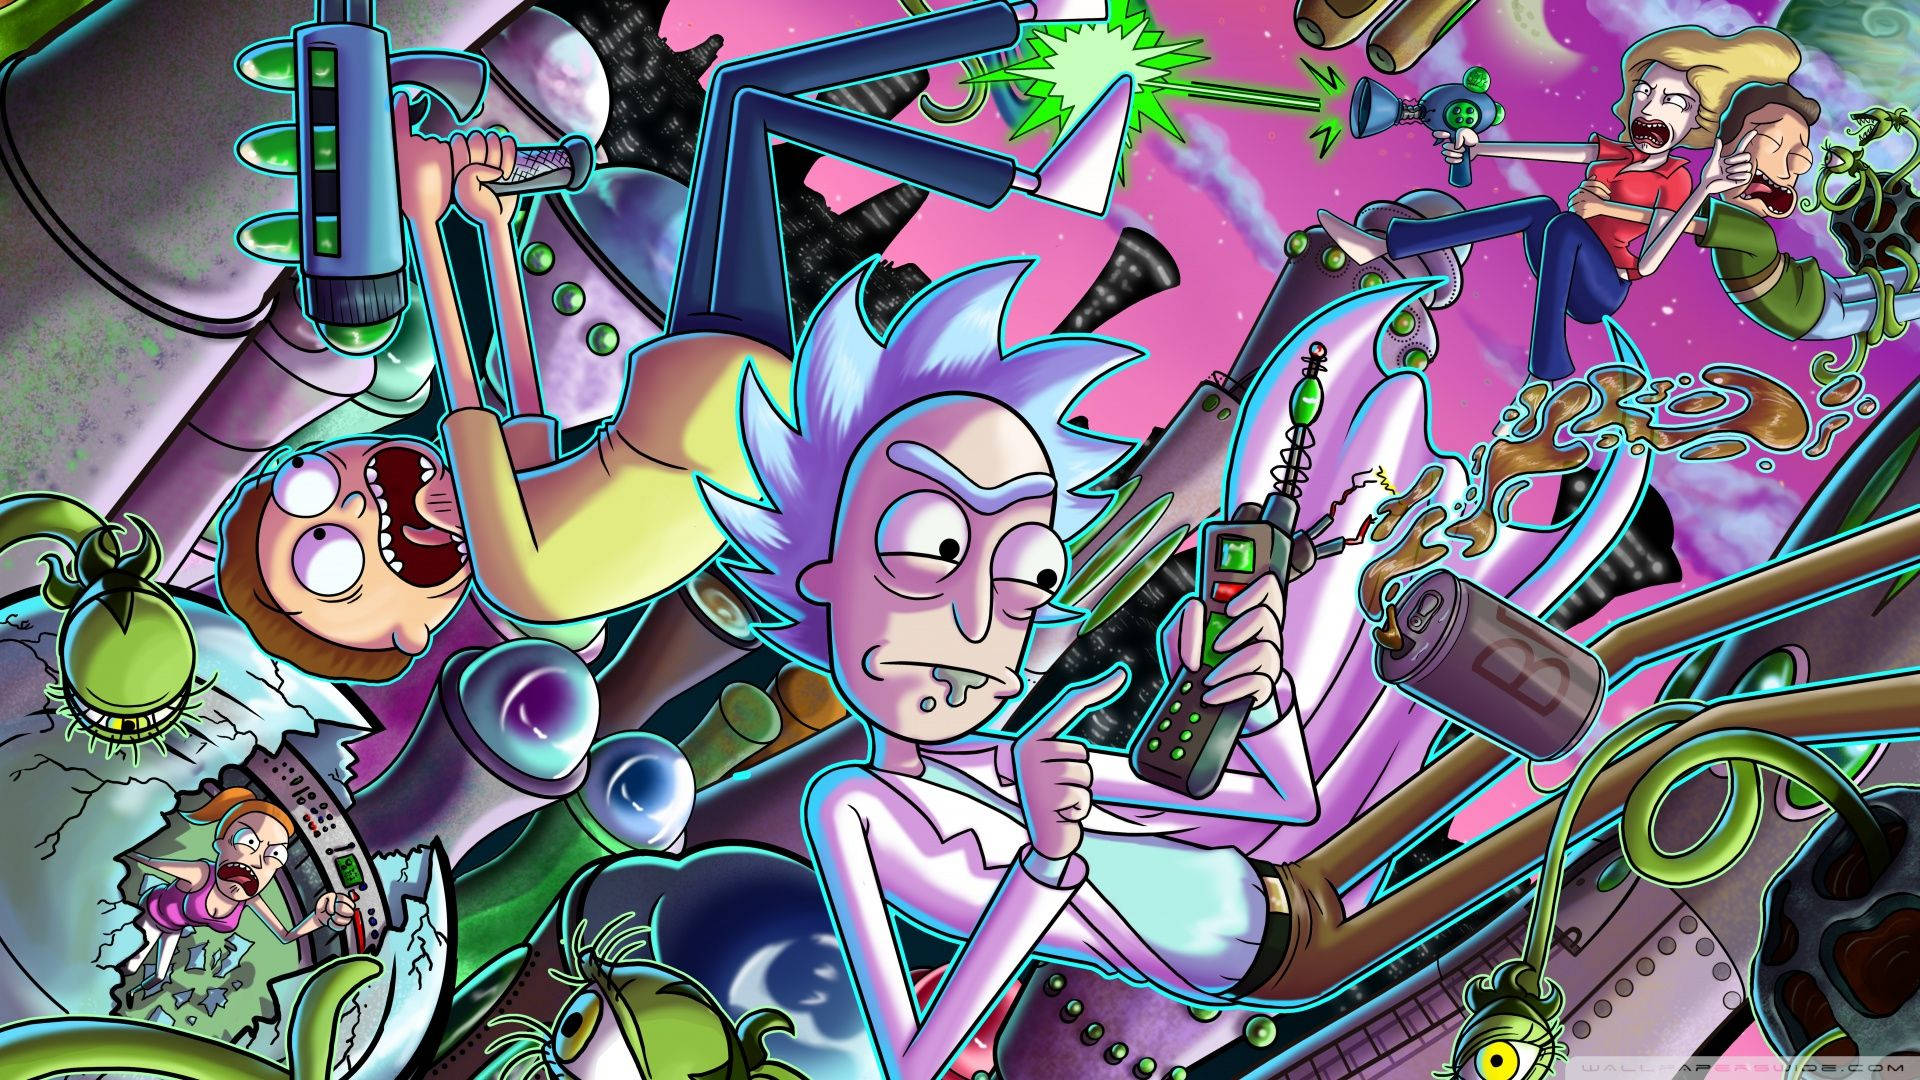 Download Rick And Morty Stoner Falling Amidst Chaos Wallpaper | Wallpapers .com